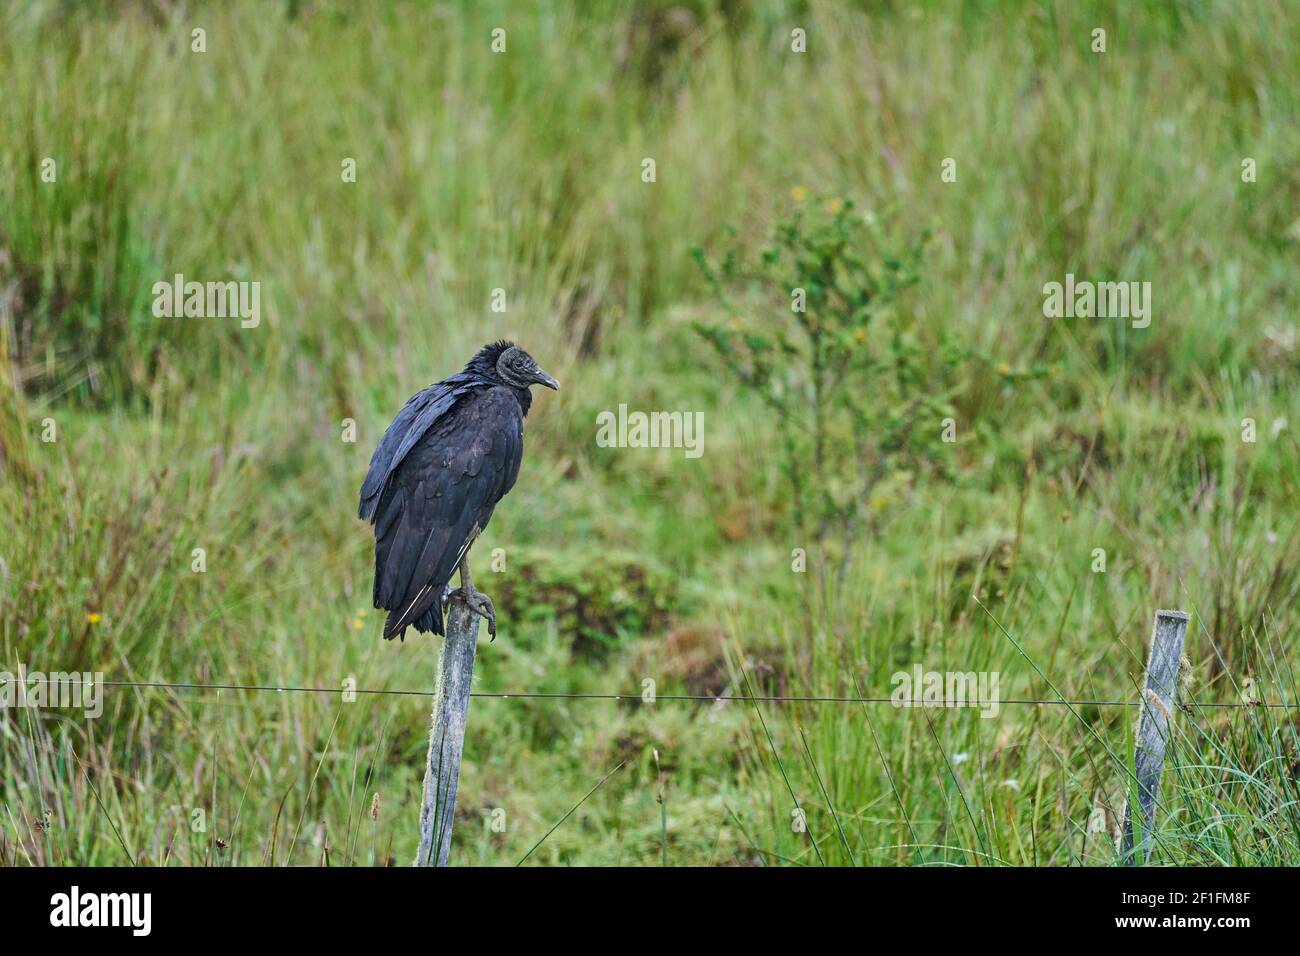 black vulture, Coragyps atratus, also American black vulture, is a bird in the New World vulture family. Sitting on a pole of a farming fence Stock Photo